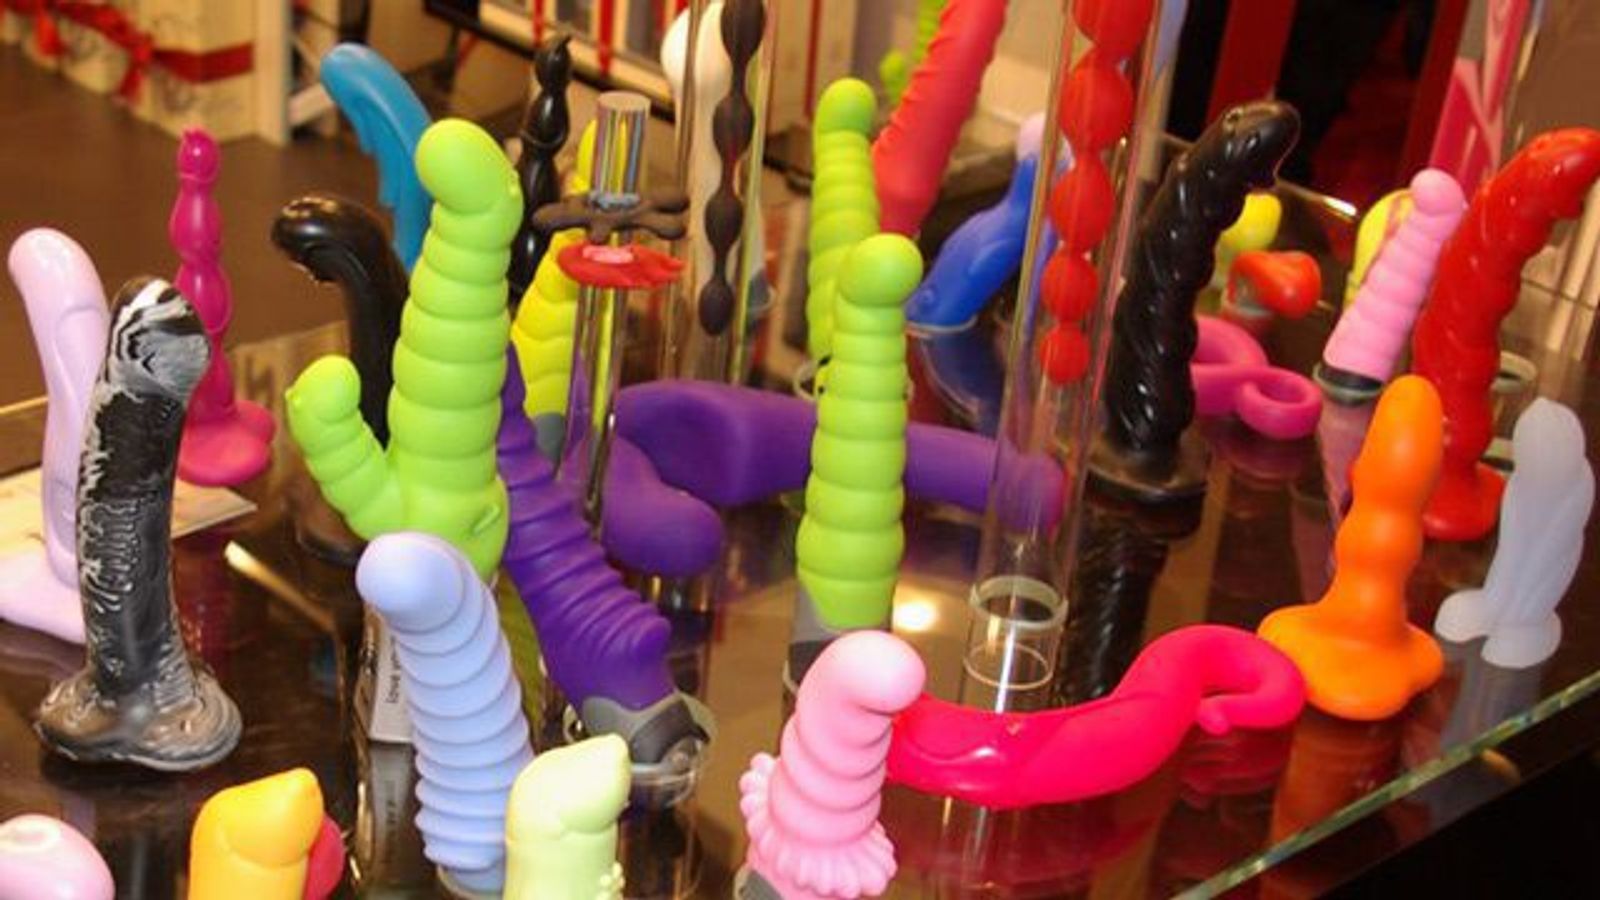 Sweden Looking To Test Sex Toys